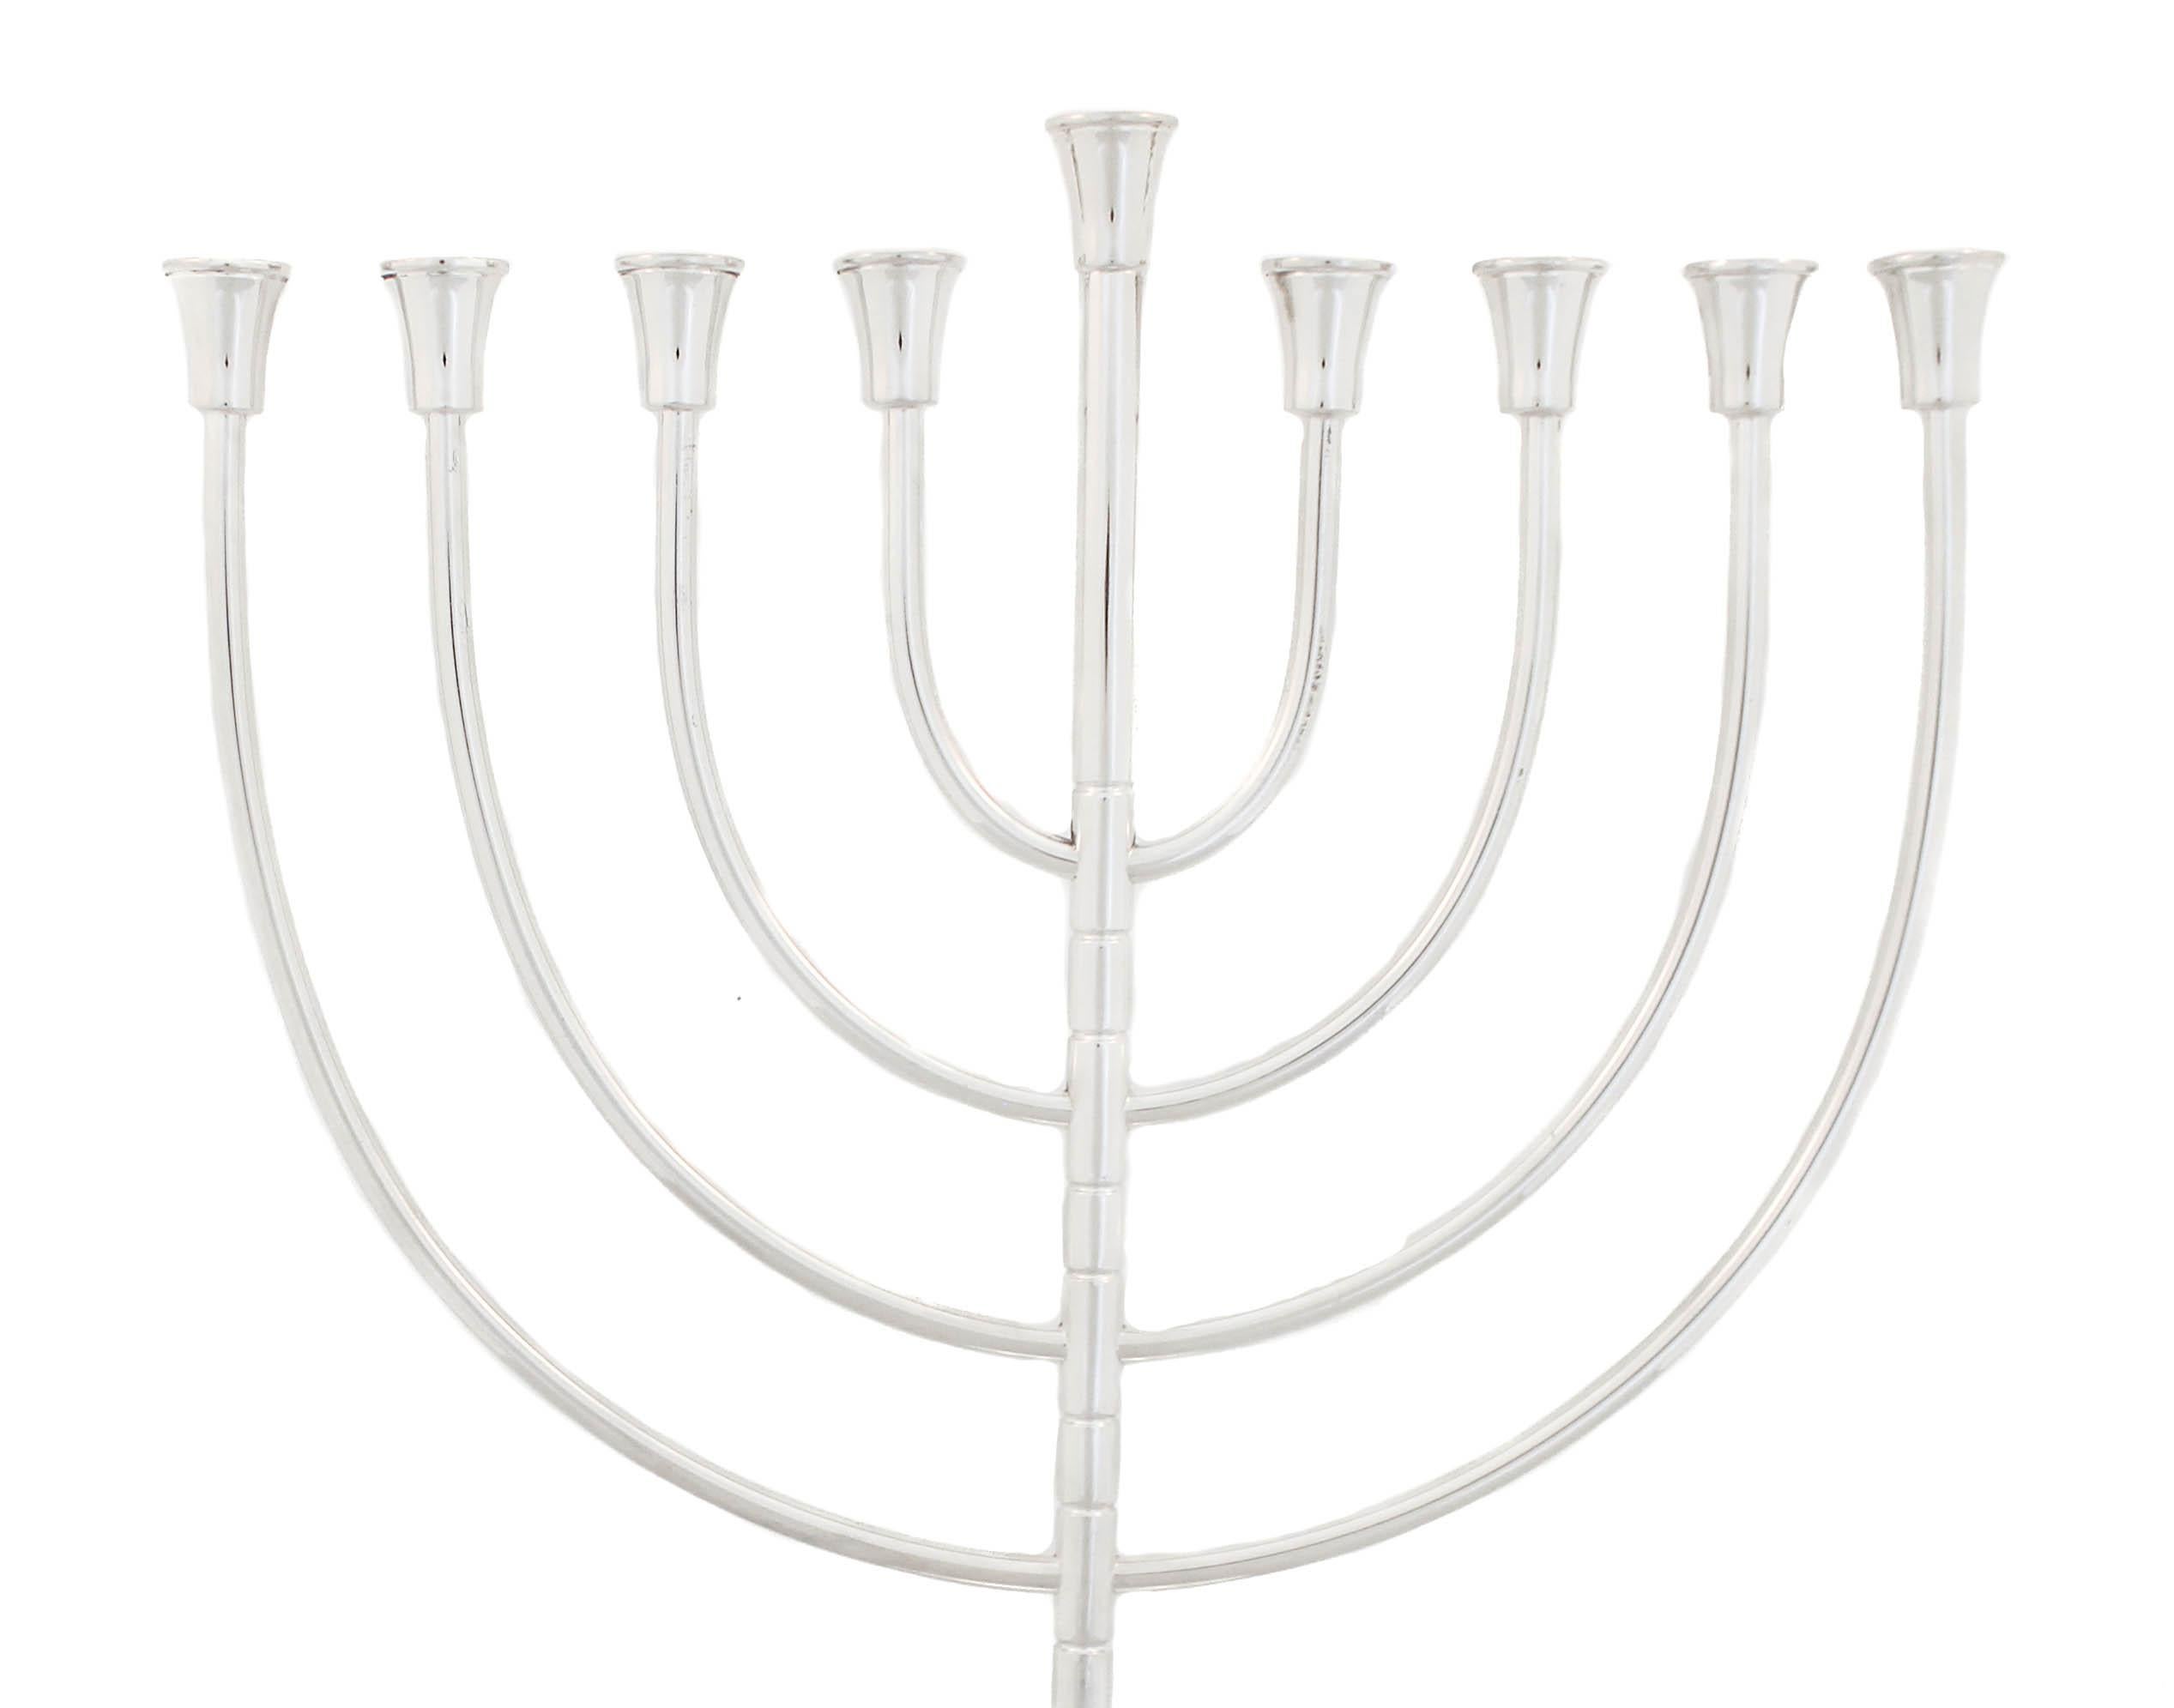 Being offered is a sterling silver menorah made in Israel.  It is modern and yet has a classic and timeless design.  Sleek and understated without any ornamentation, it brings a contemporary aesthetic to an ancient tradition.
Happy Hanukkah!